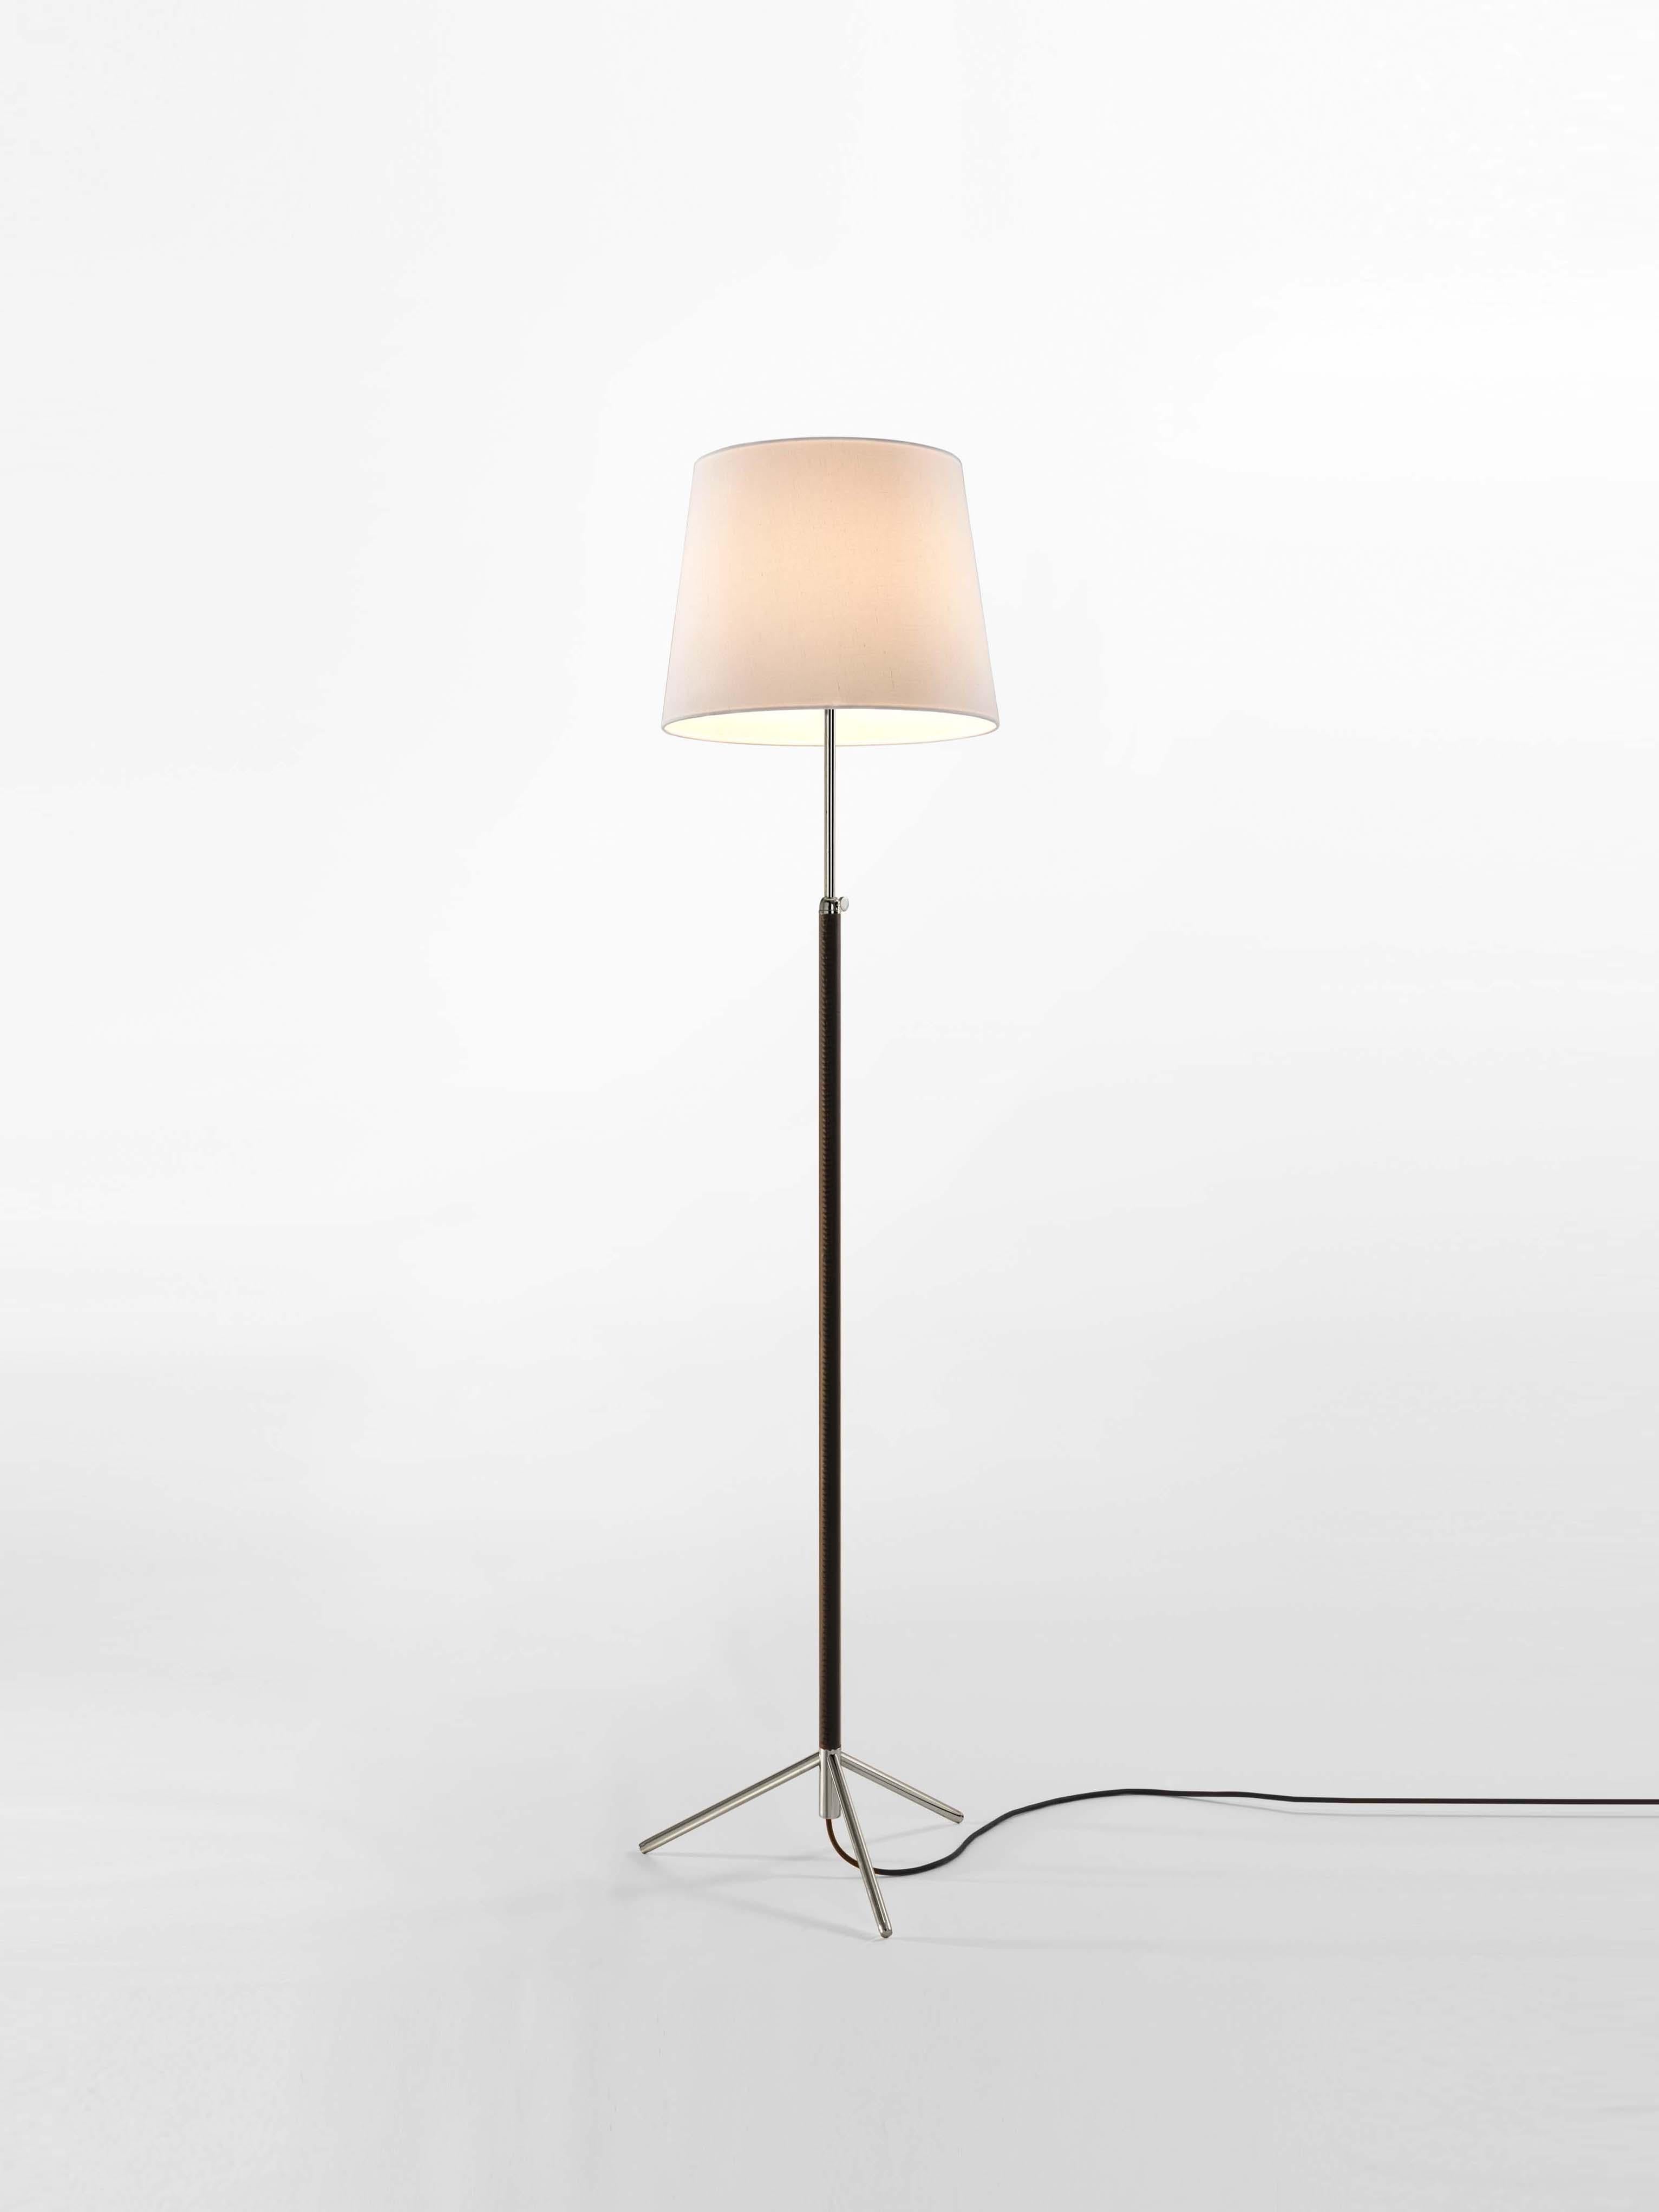 White and chrome Pie de Salón G3 floor lamp by Jaume Sans
Dimensions: D 40 x H 120-160 cm
Materials: Metal, leather, linen.
Available in chrome-plated or polished brass structure.
Available in other shade colors and sizes.

This slender